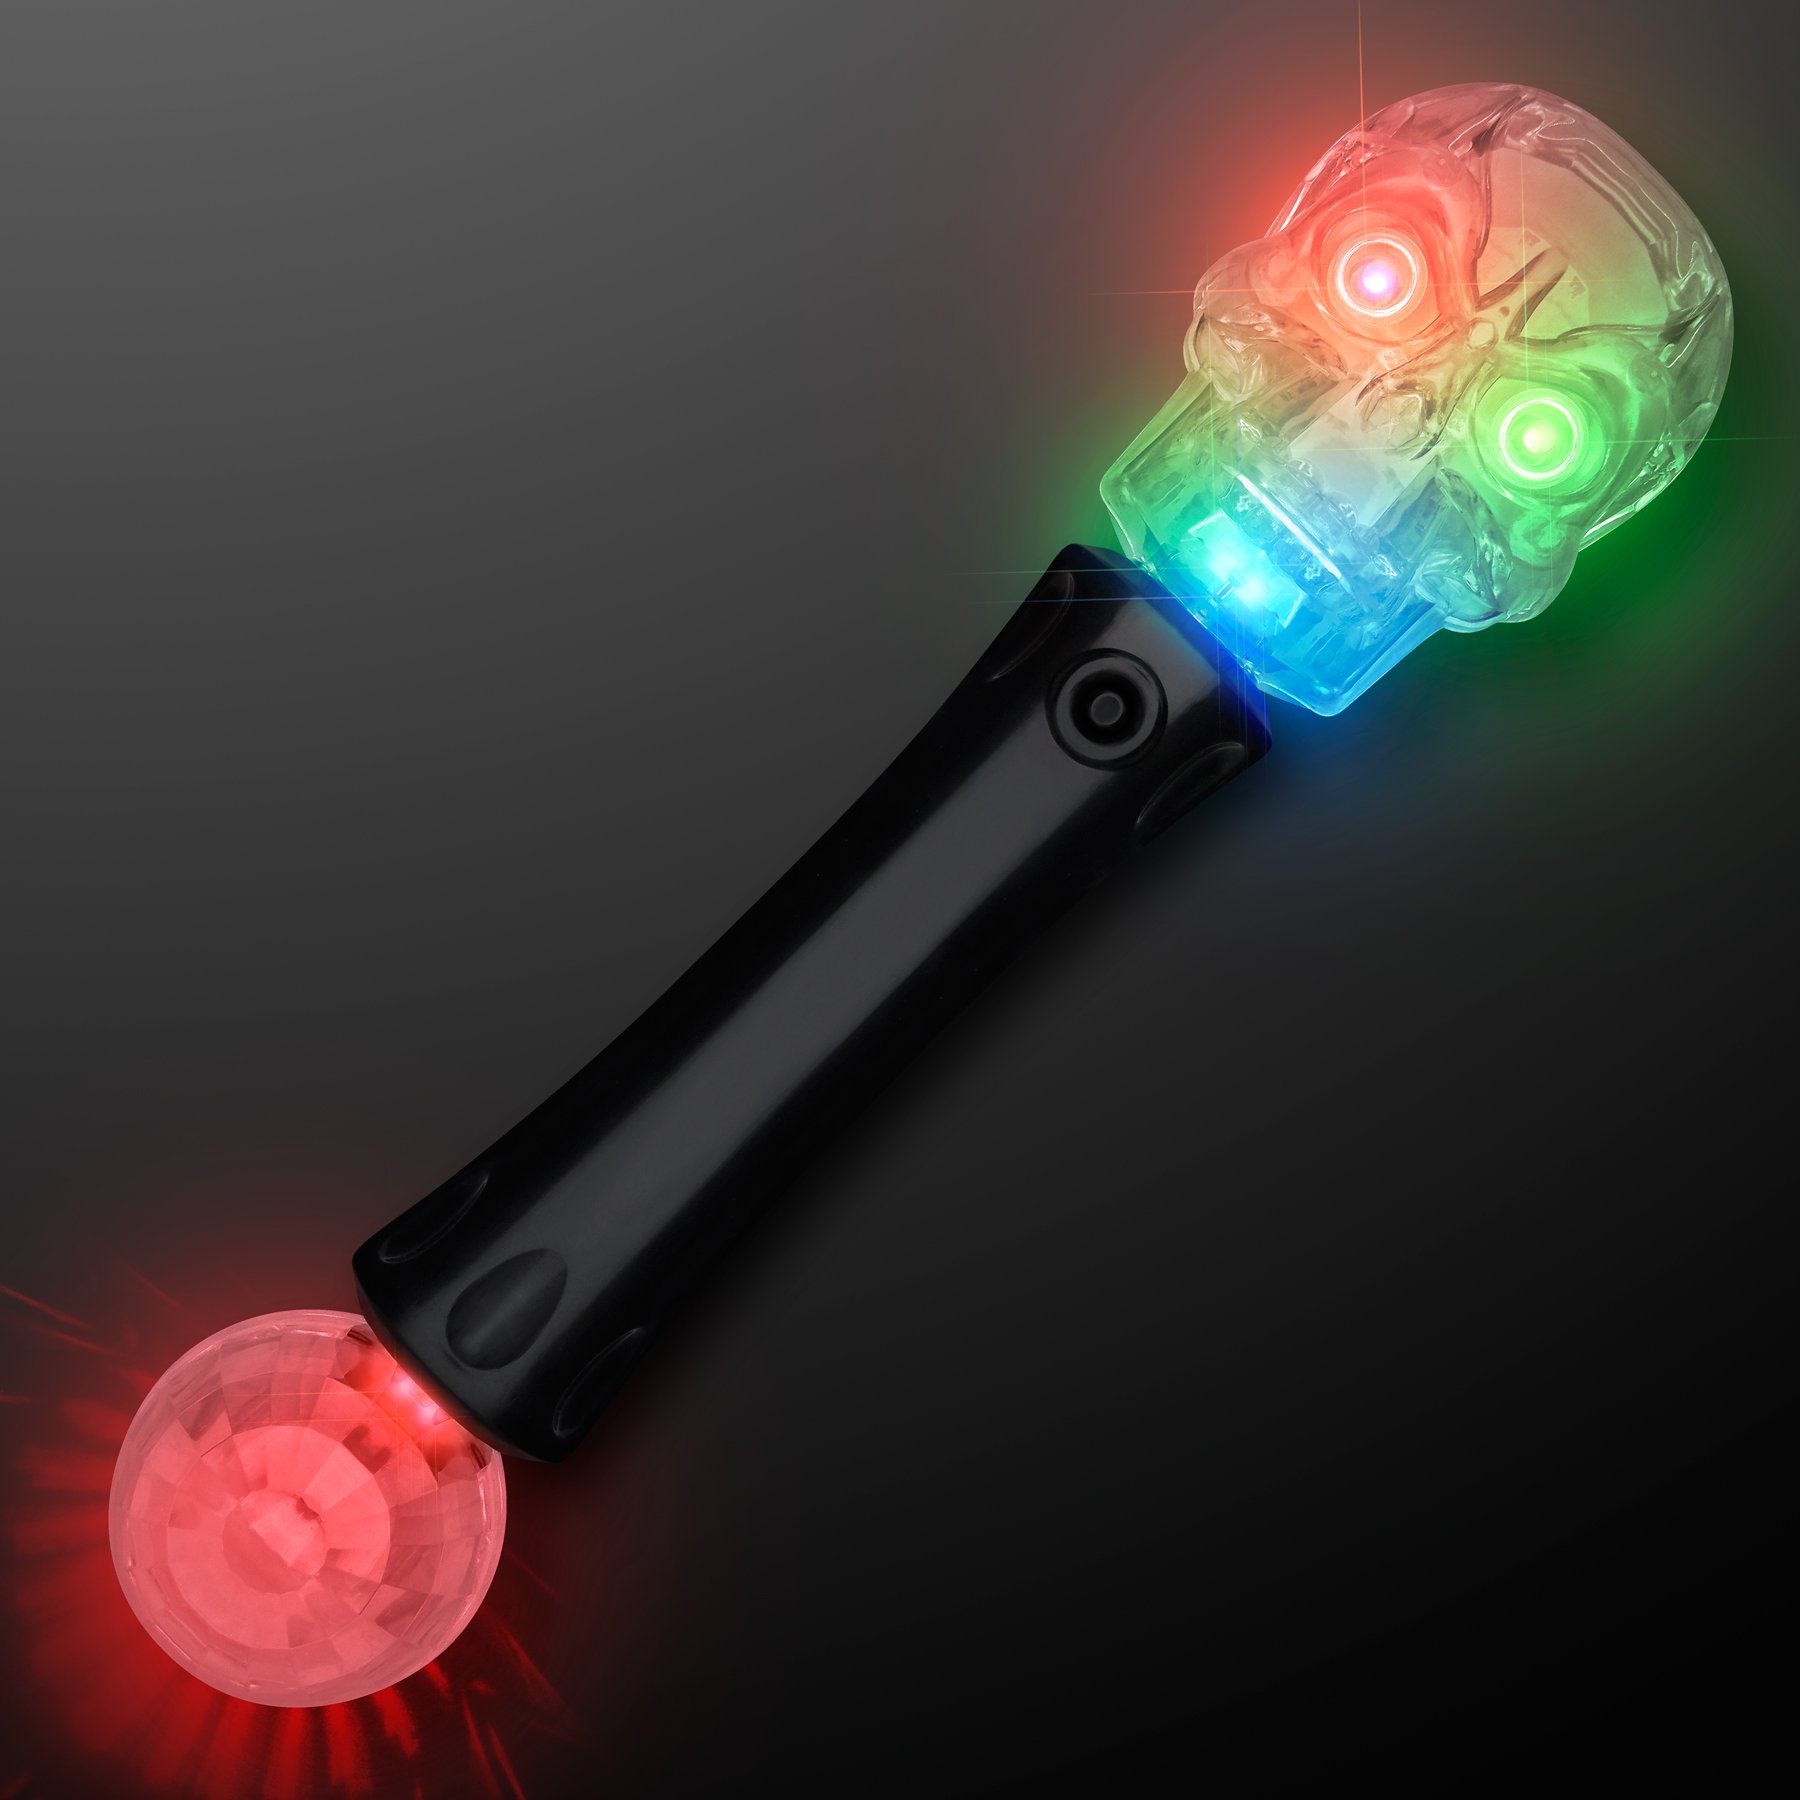  FlashingBlinkyLights Light Up Curved Pirate Sword with LED  Crystal Ball : Toys & Games